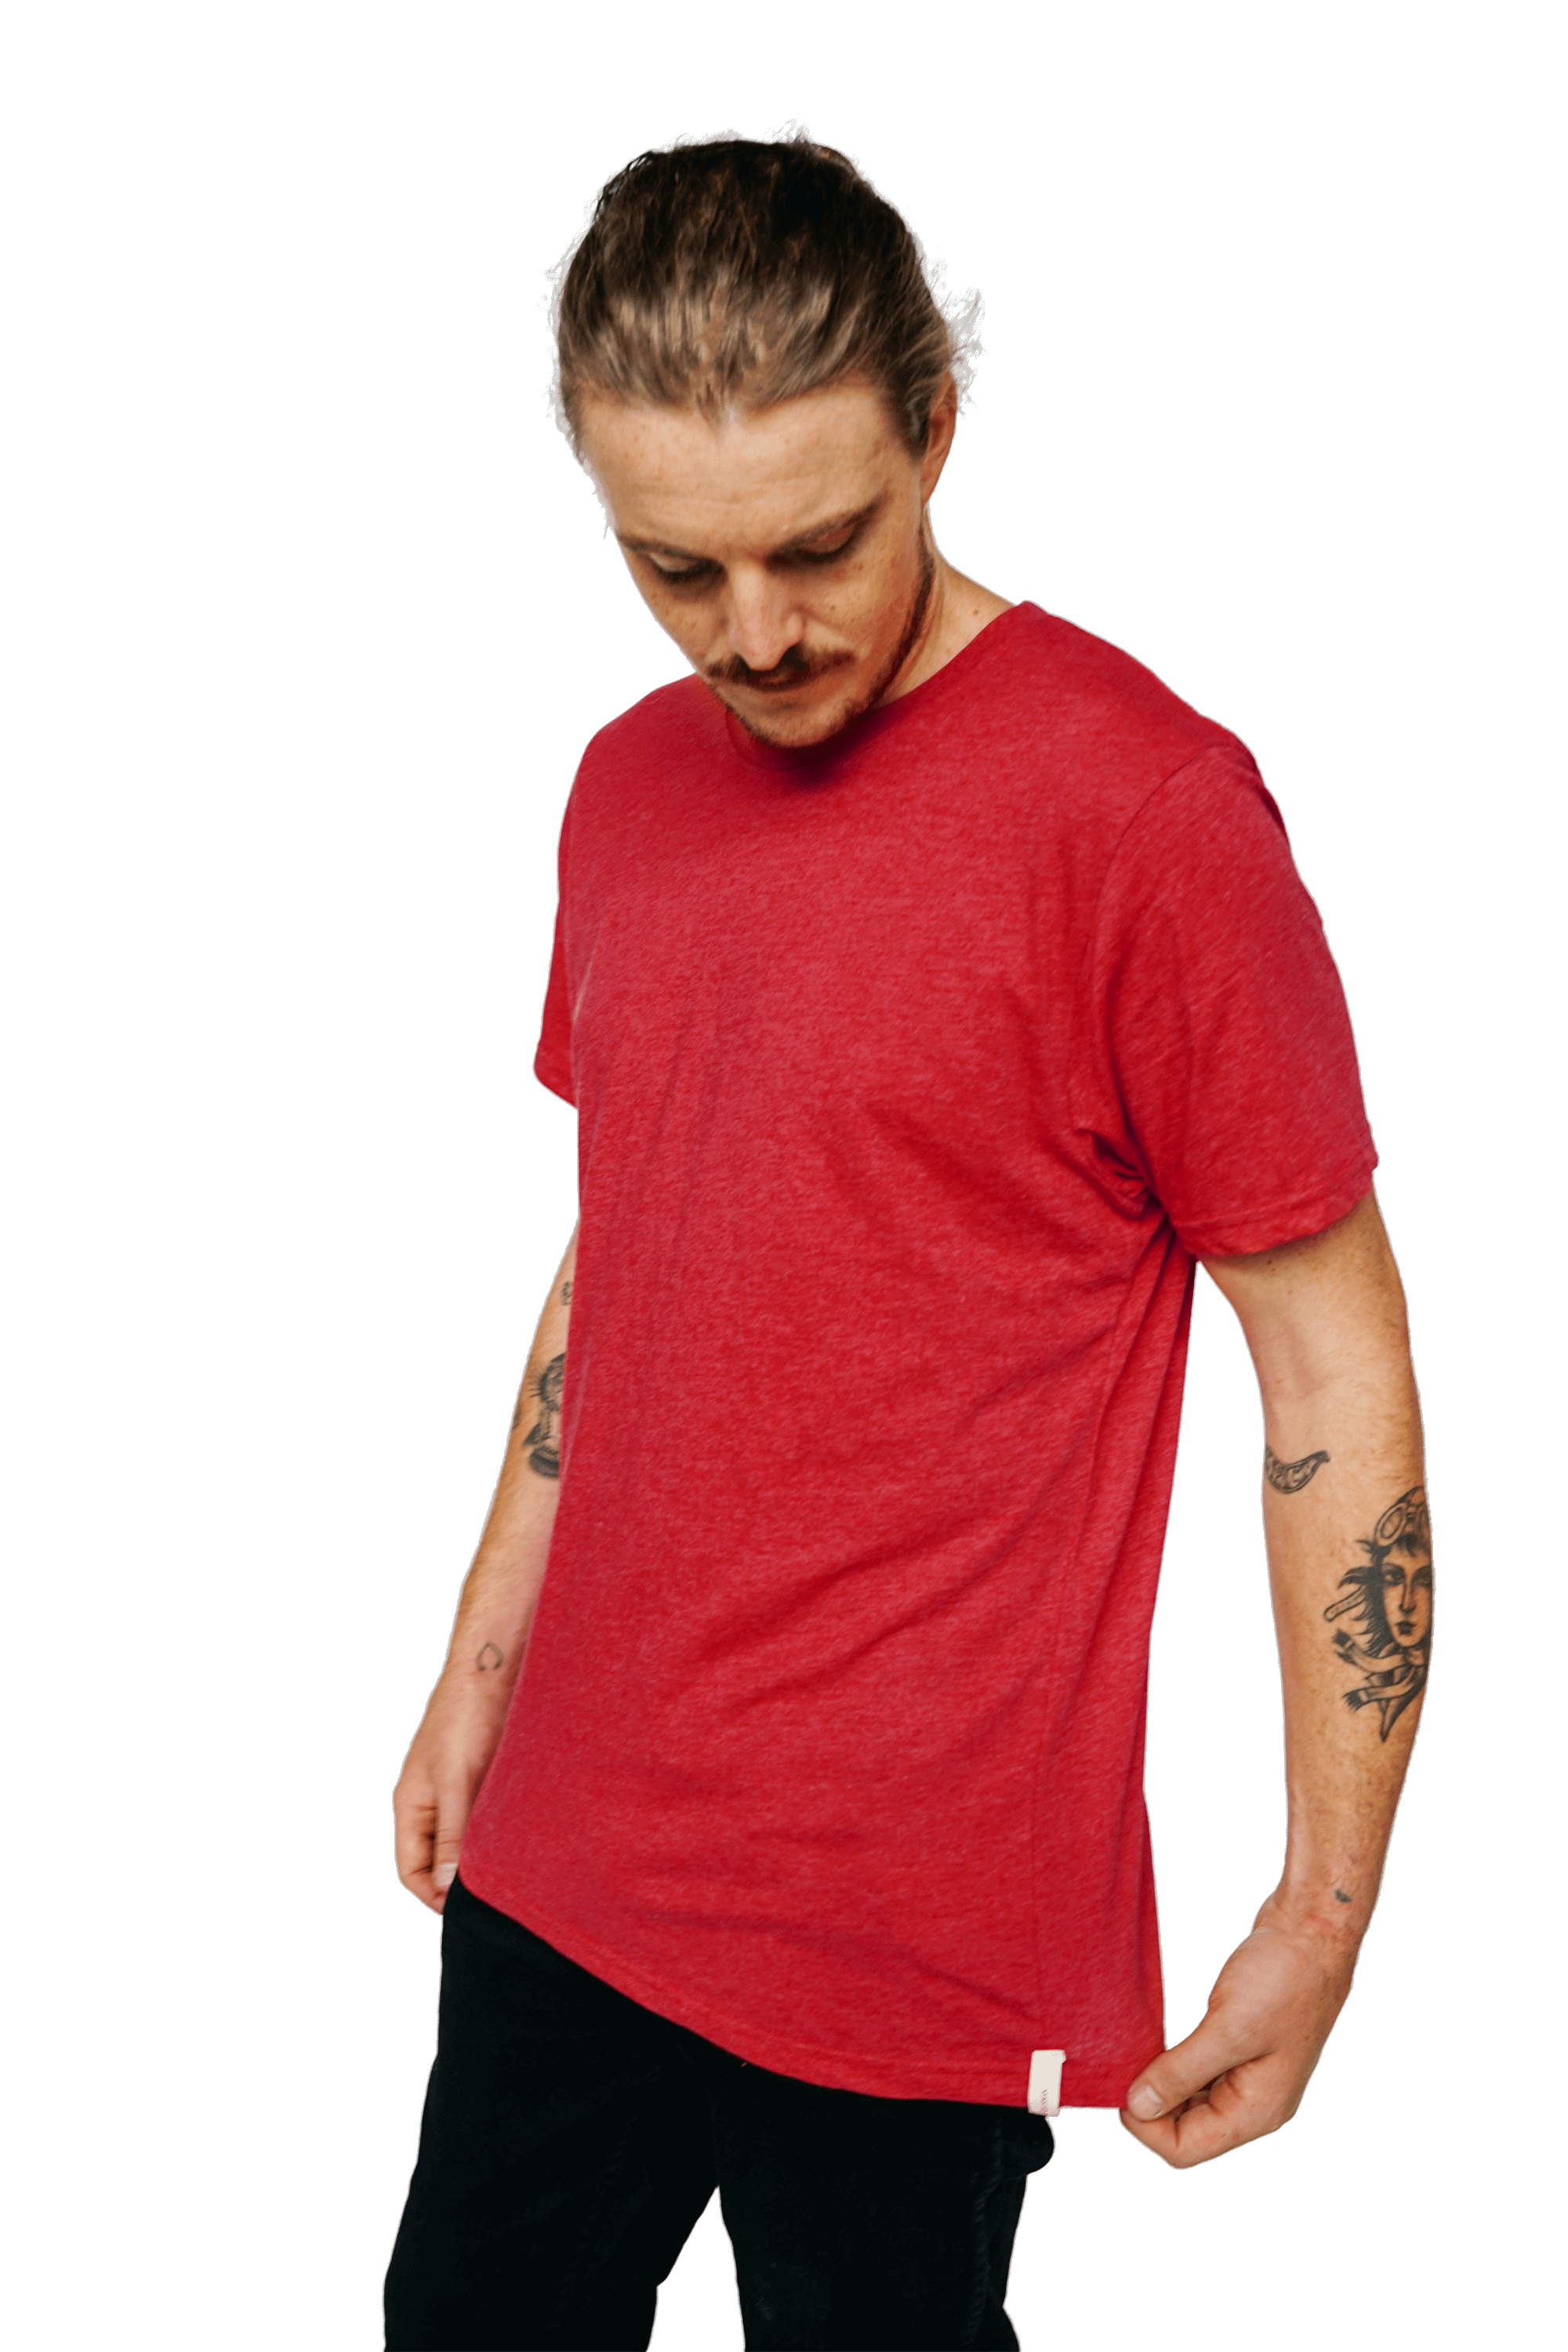 XWASTED Man wearing faded red organic 100% recycled t-shirt 